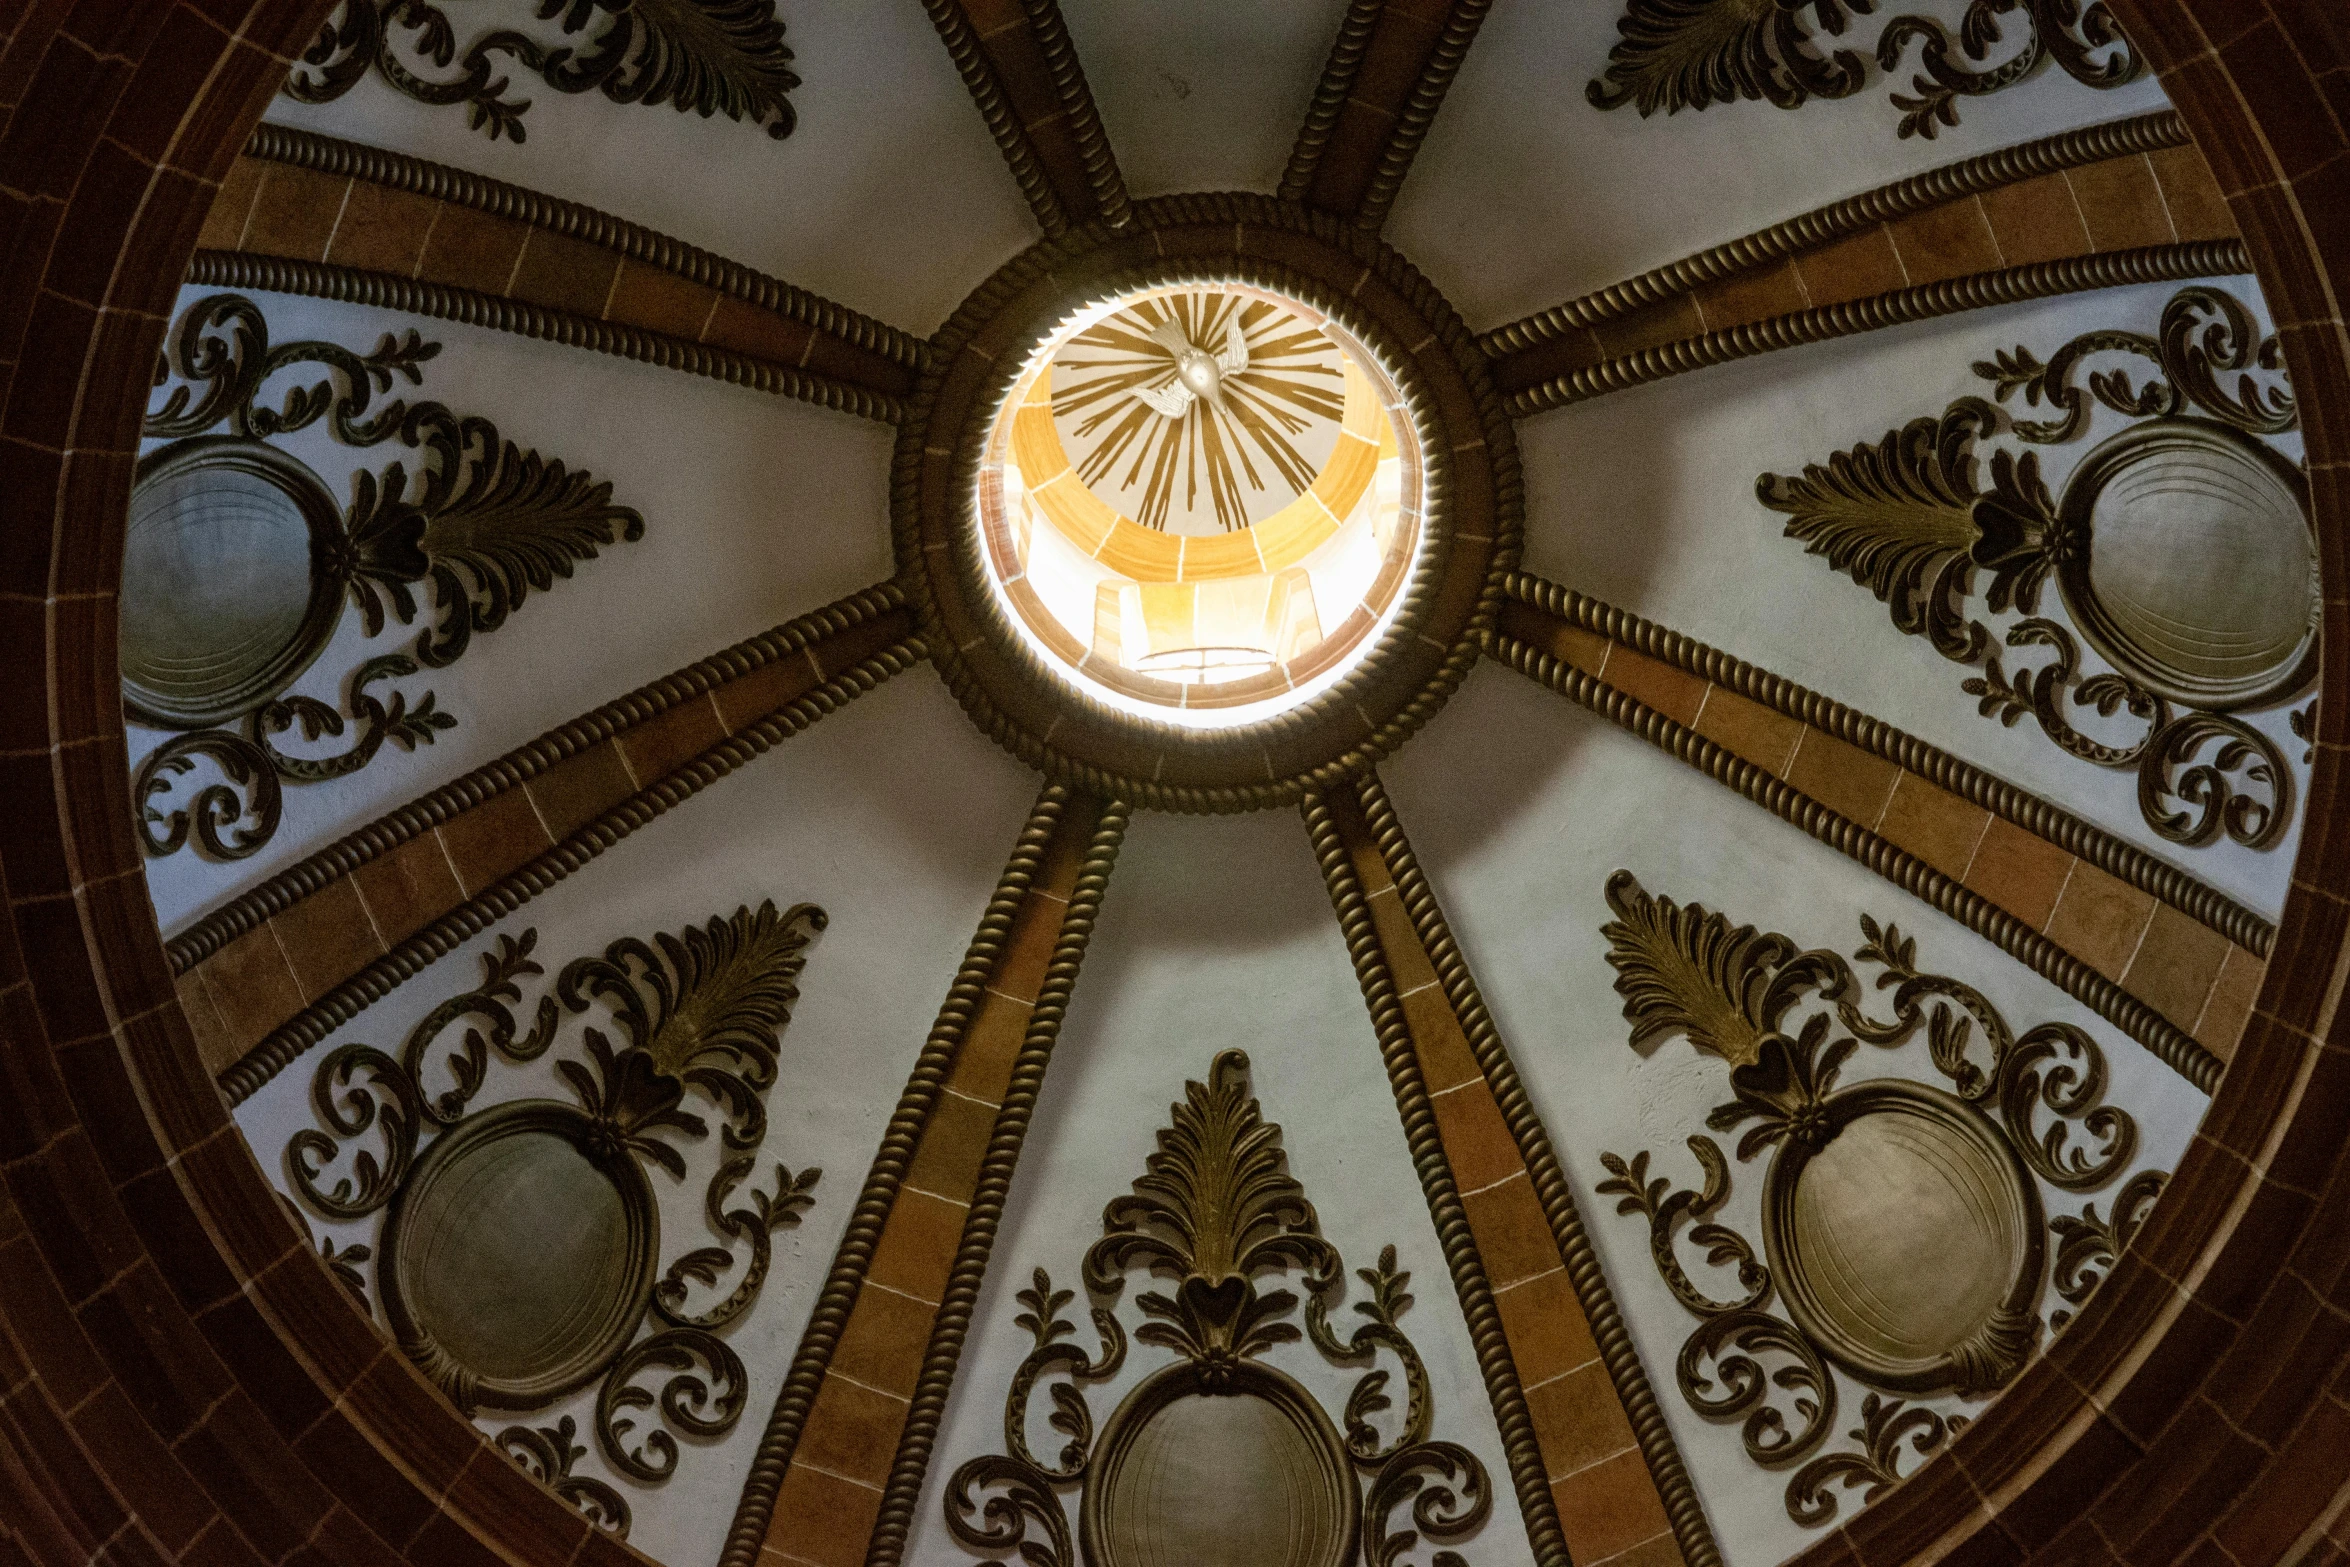 a domed ceiling with an ornate pattern with gold